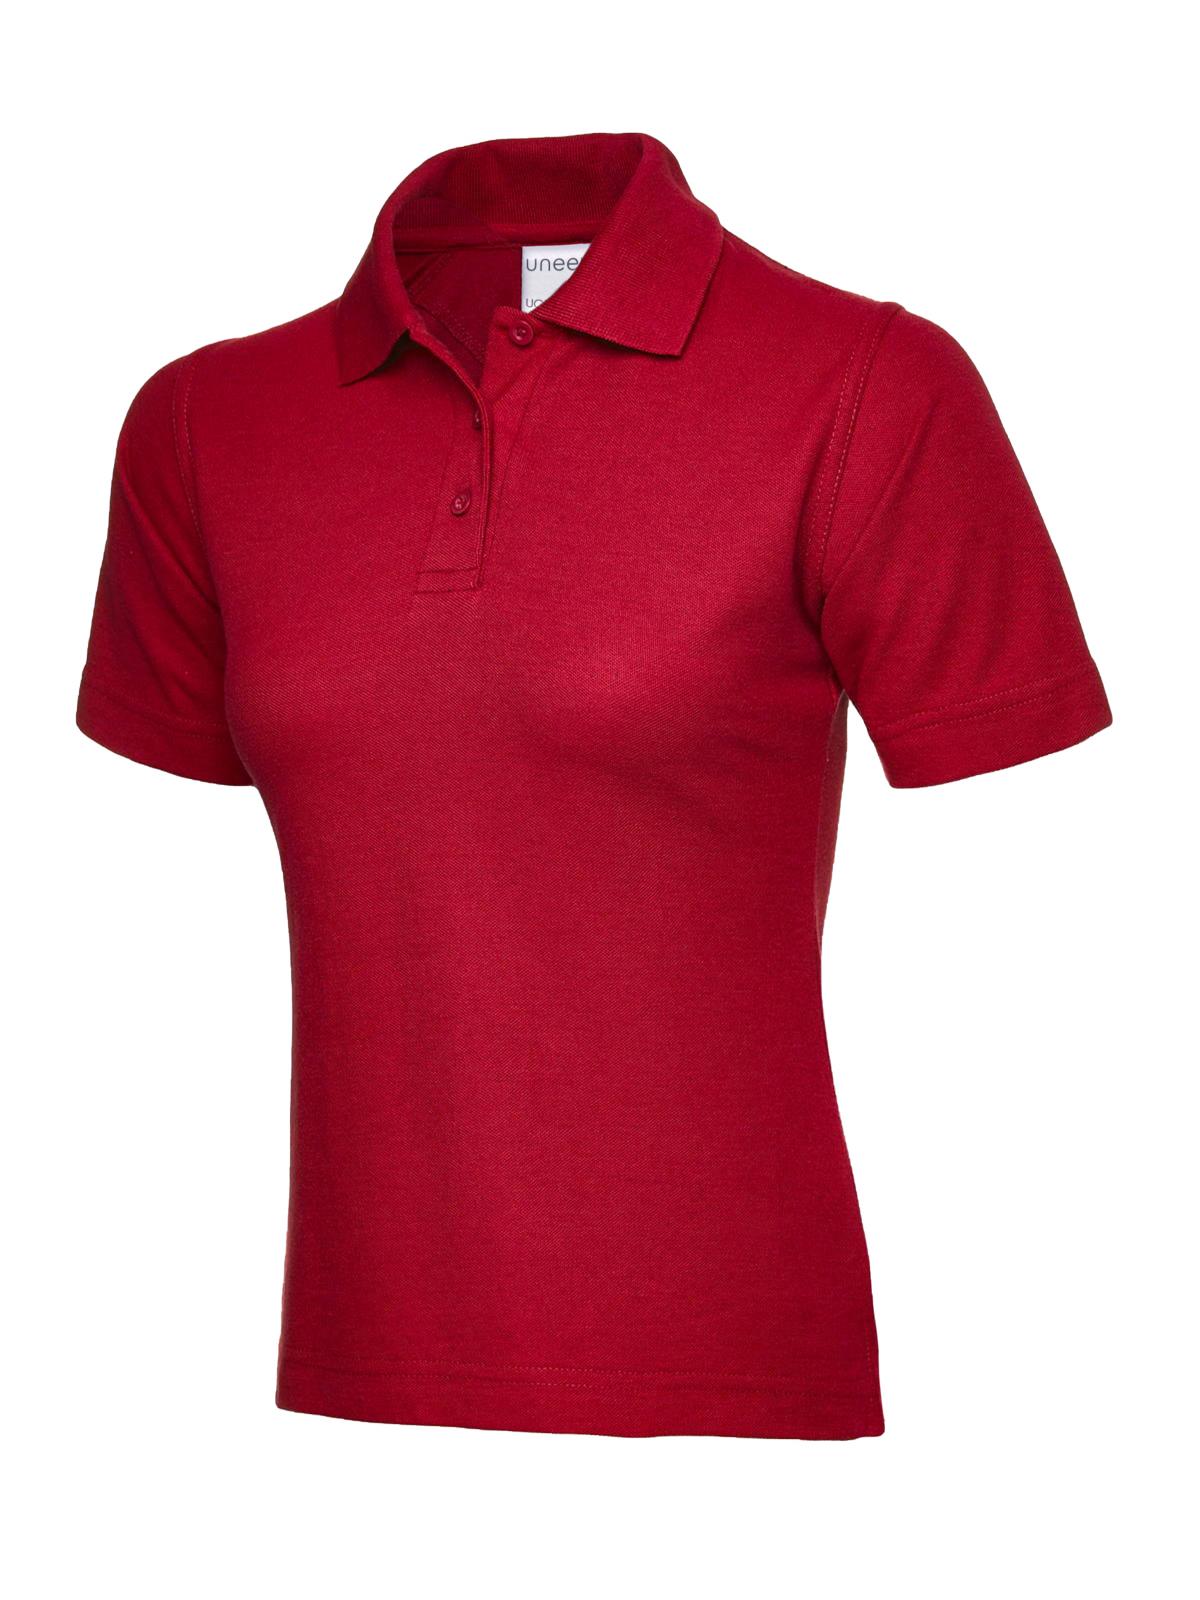 ladies_ultra_cotton_polo_shirt_red